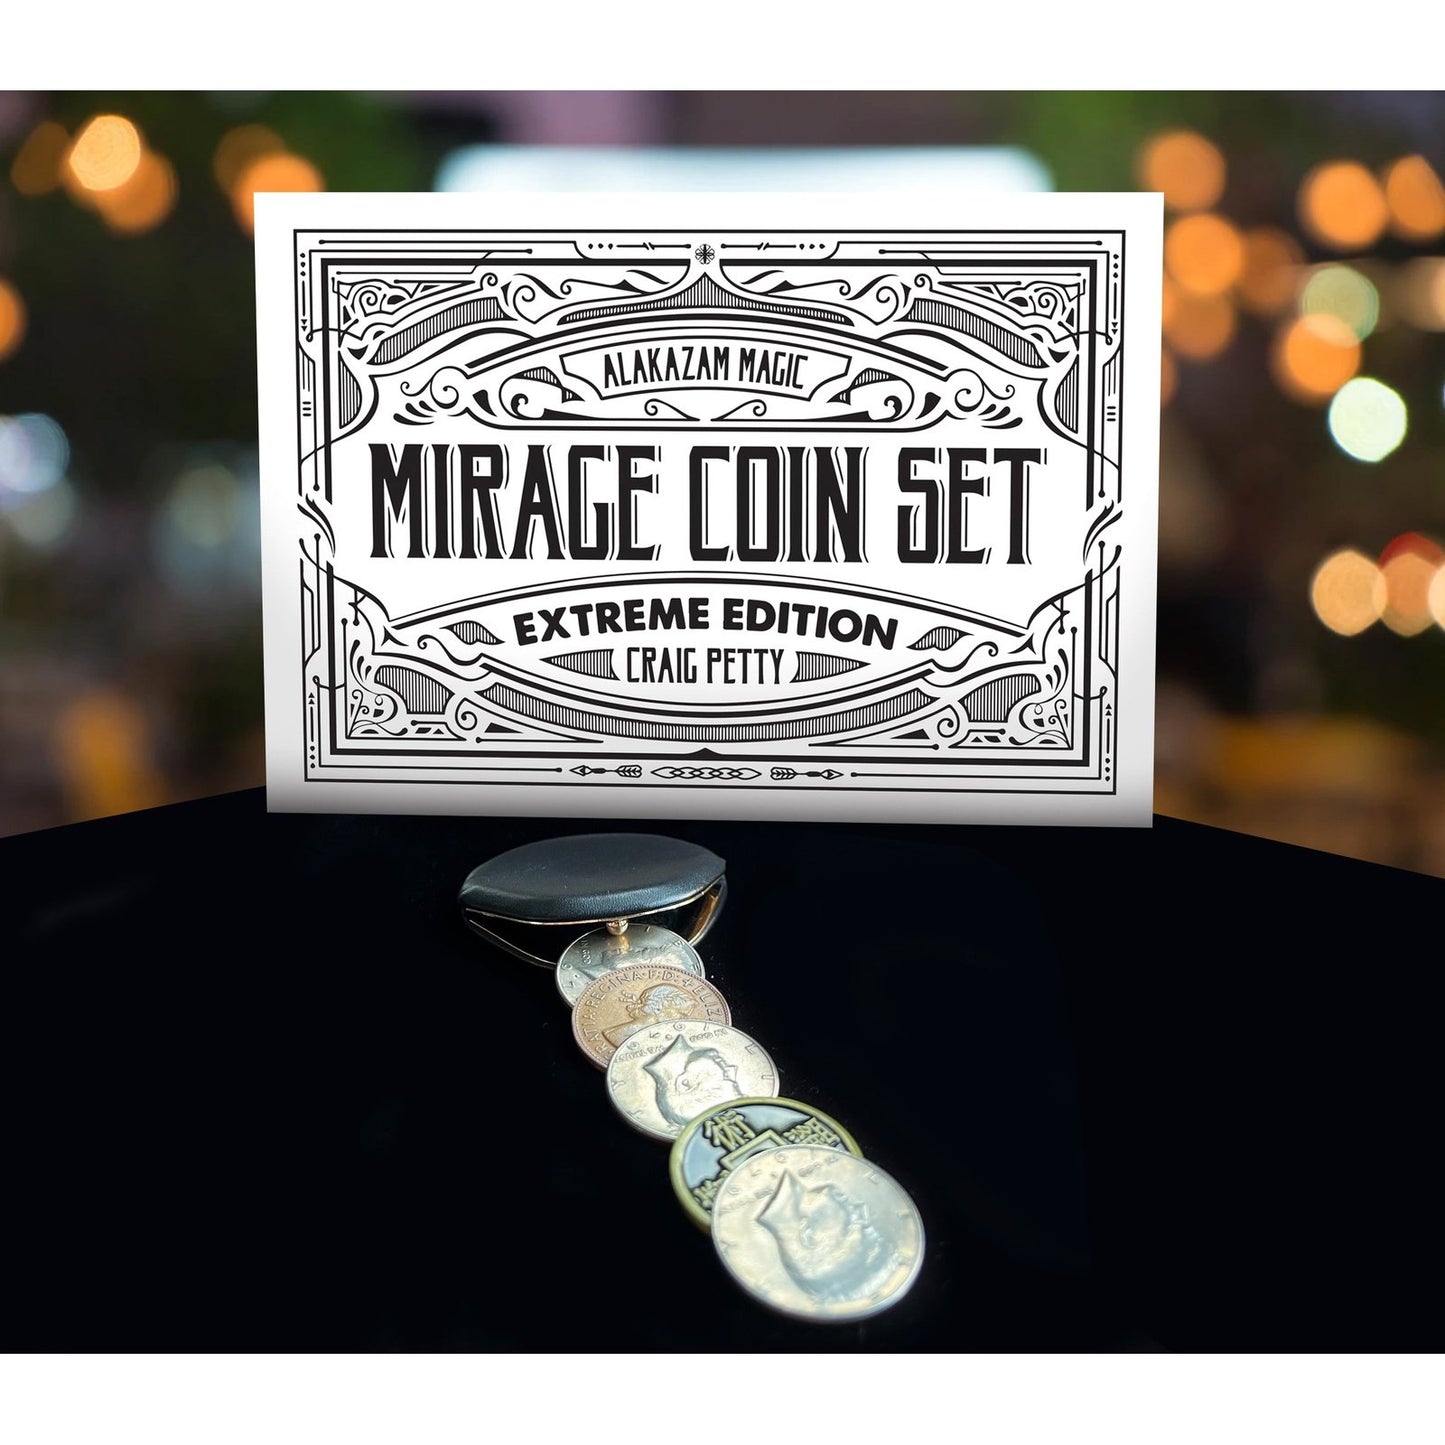 The Mirage Coin Set Extreme by Craig Petty